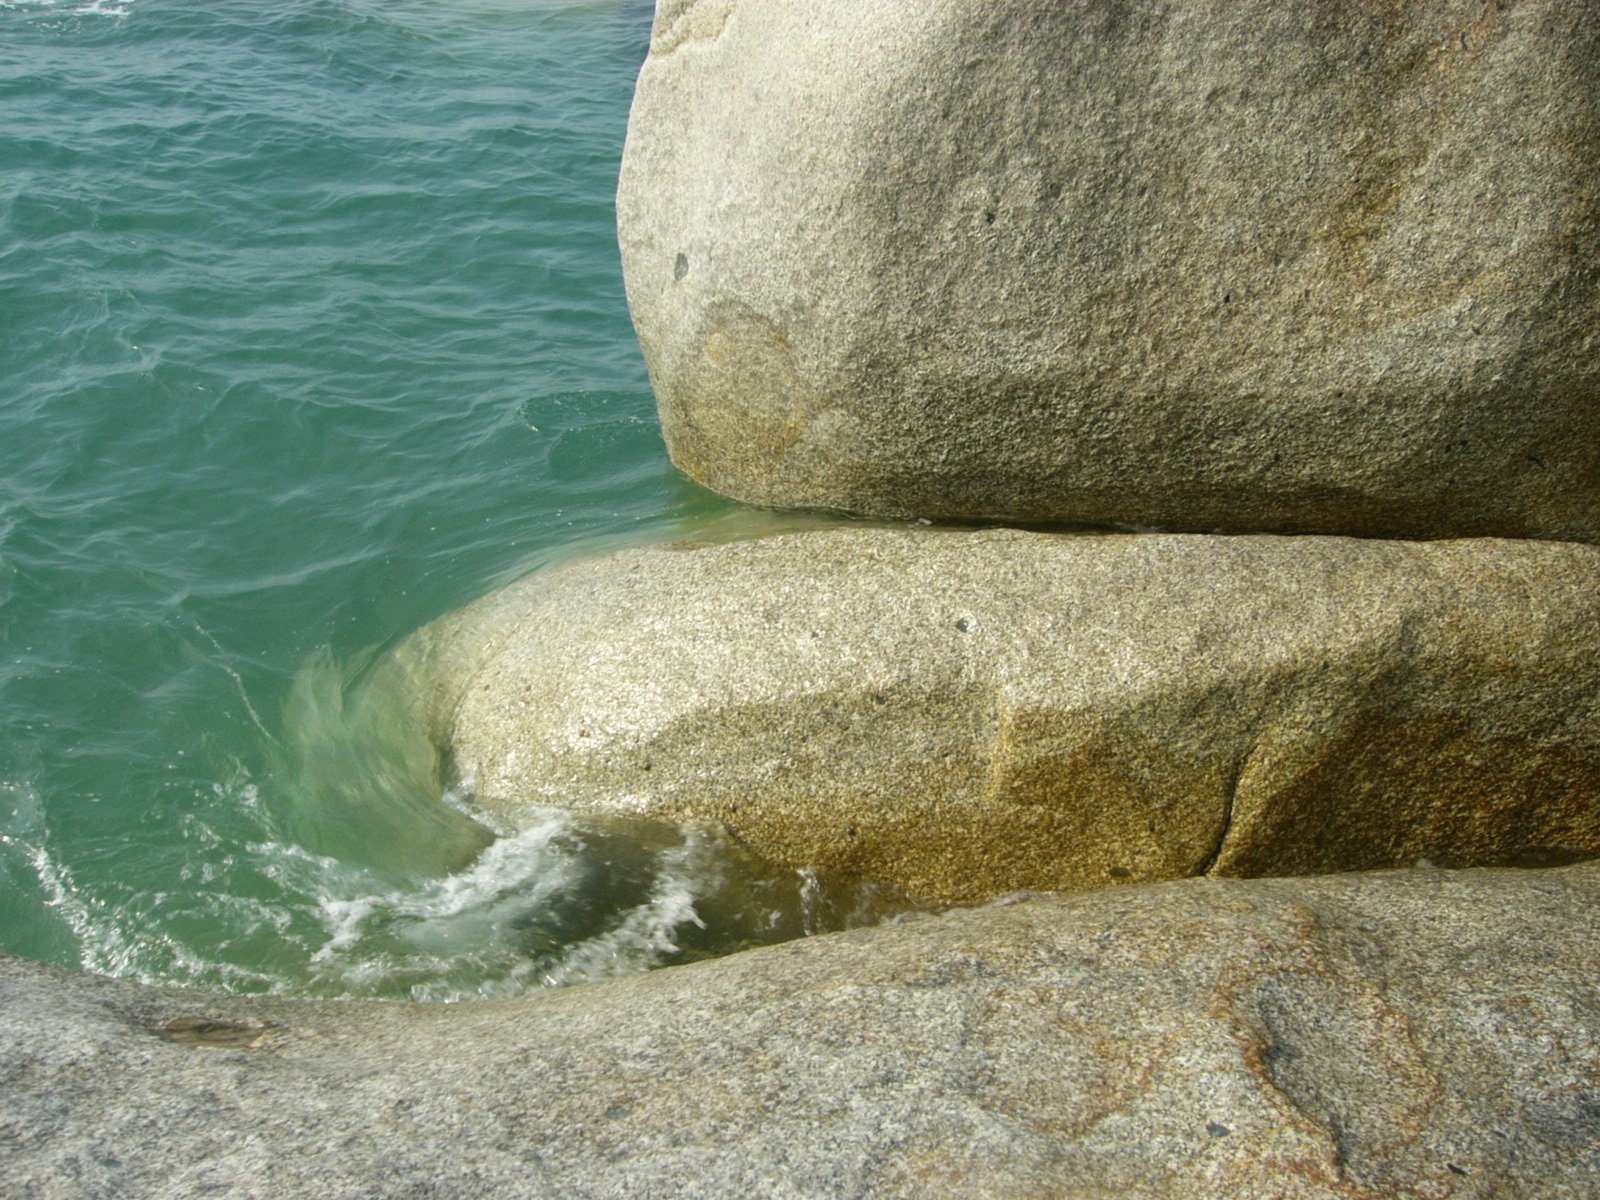 large, large and small rocks in front of the ocean